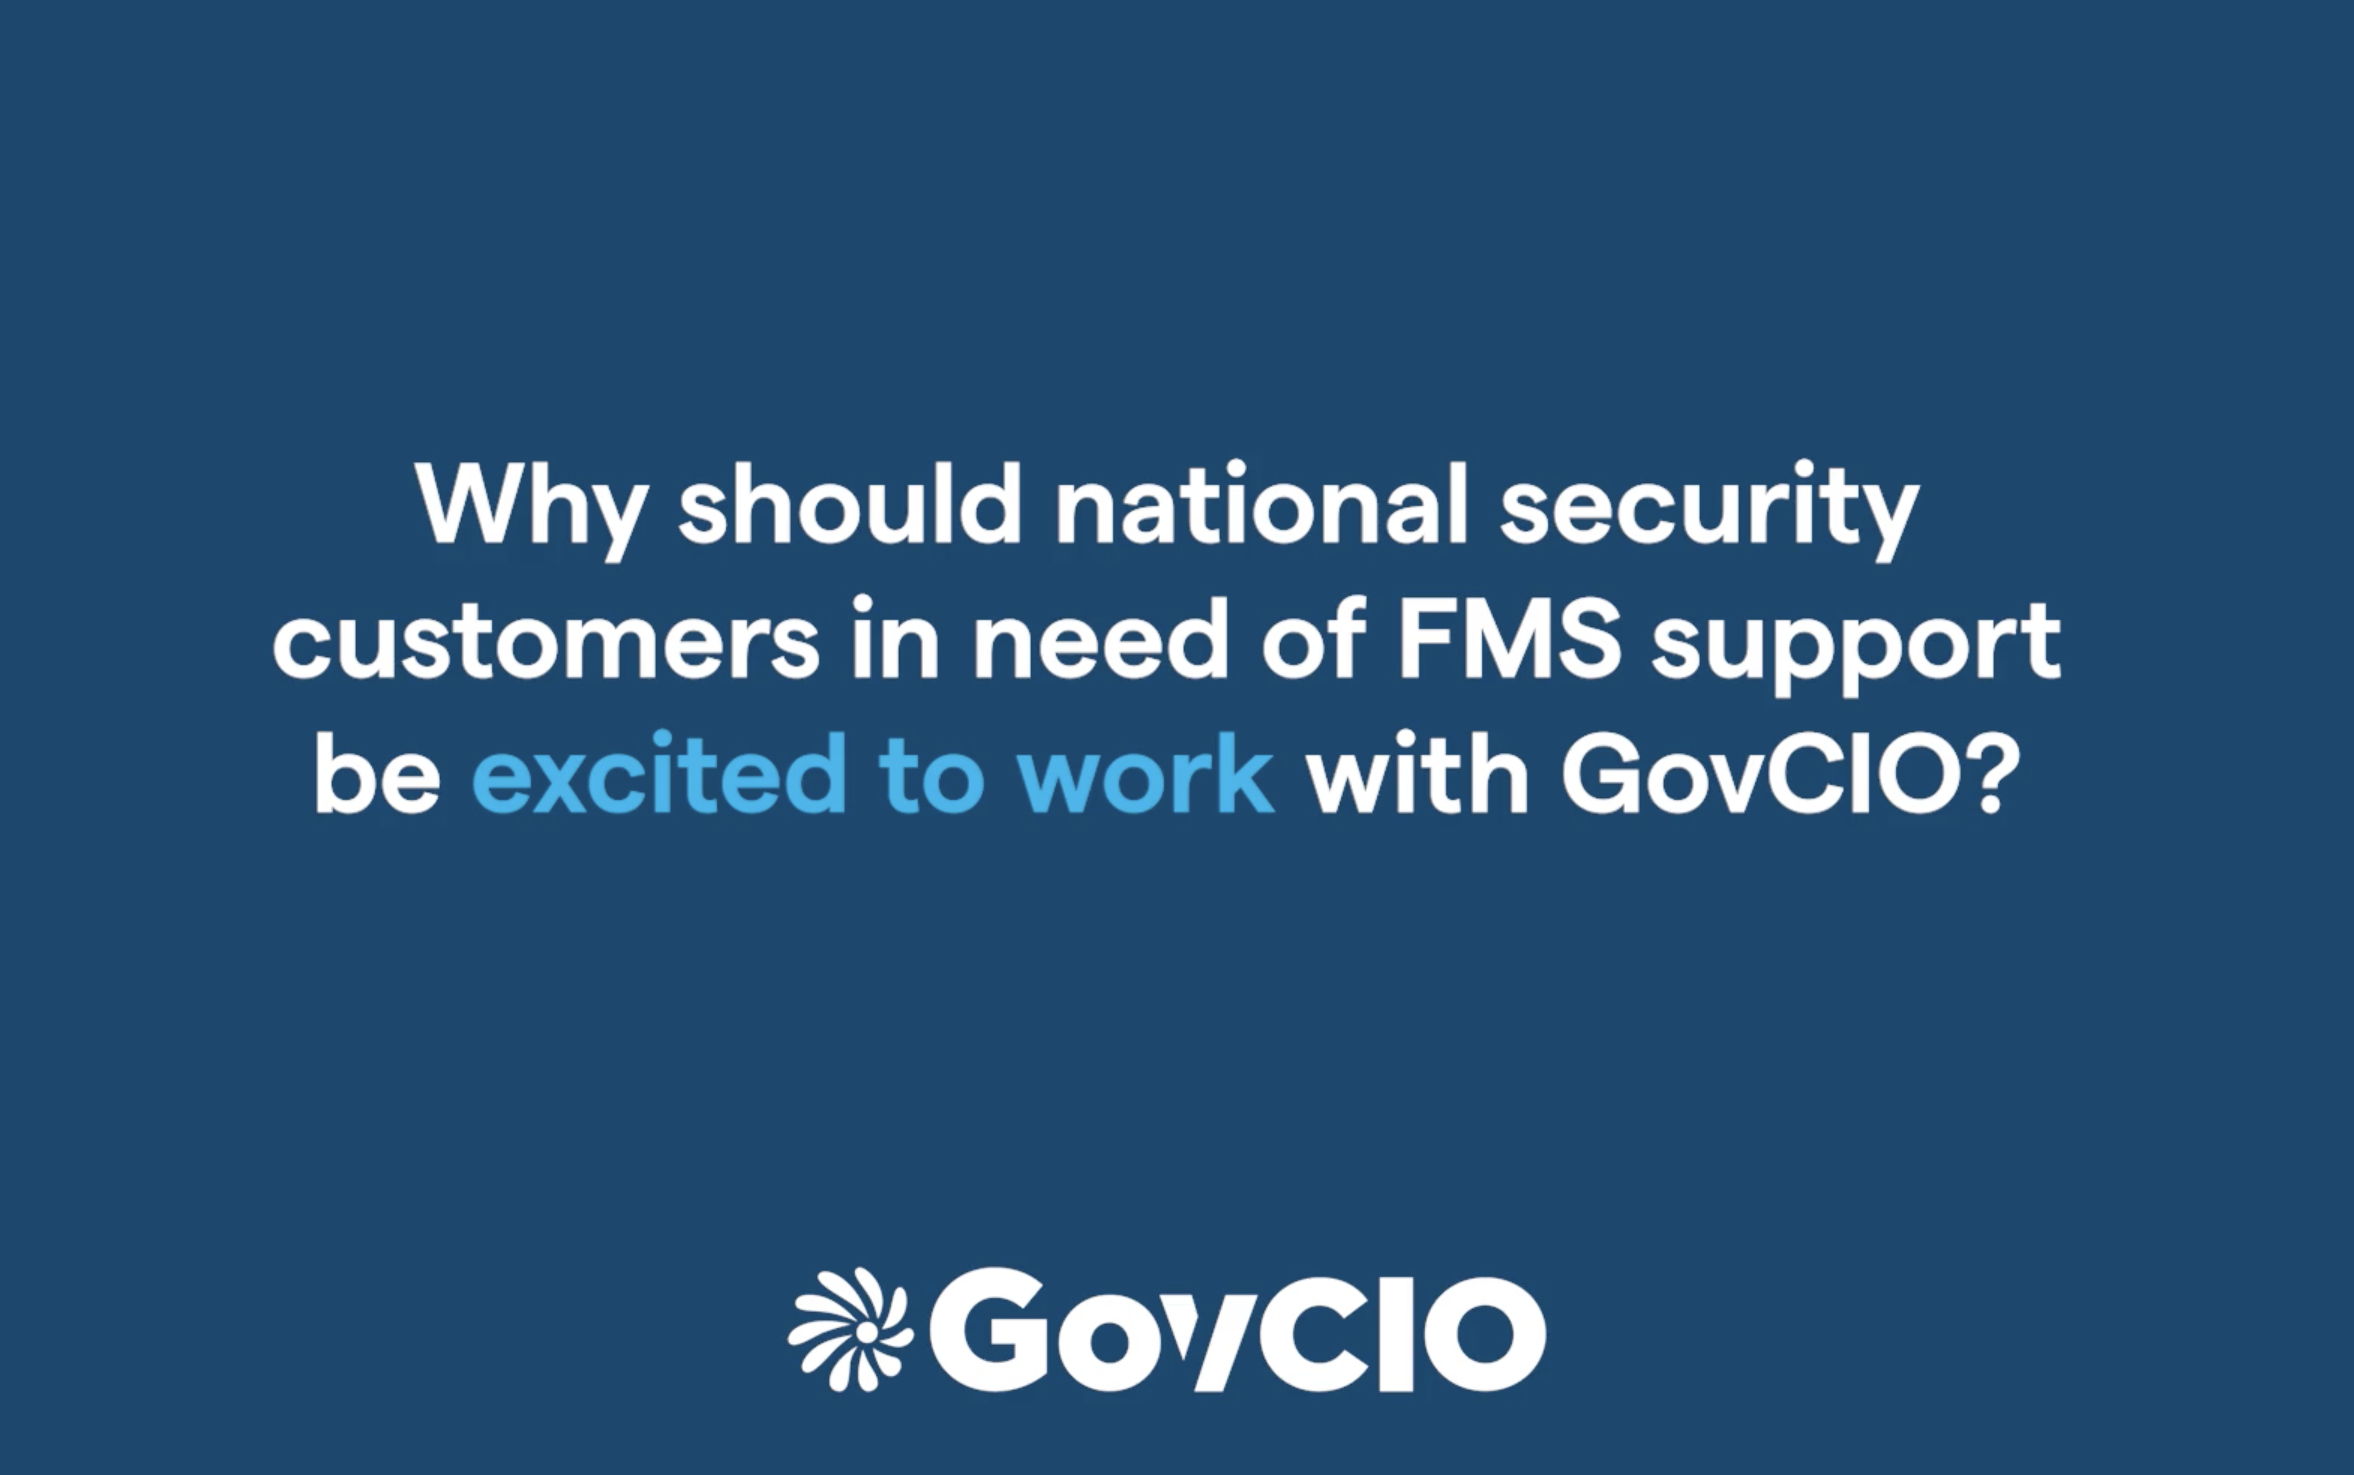 Blue block with words in light blue and white that say "Why should national security customers in need of FMS support be excited to work with GovCIO?"